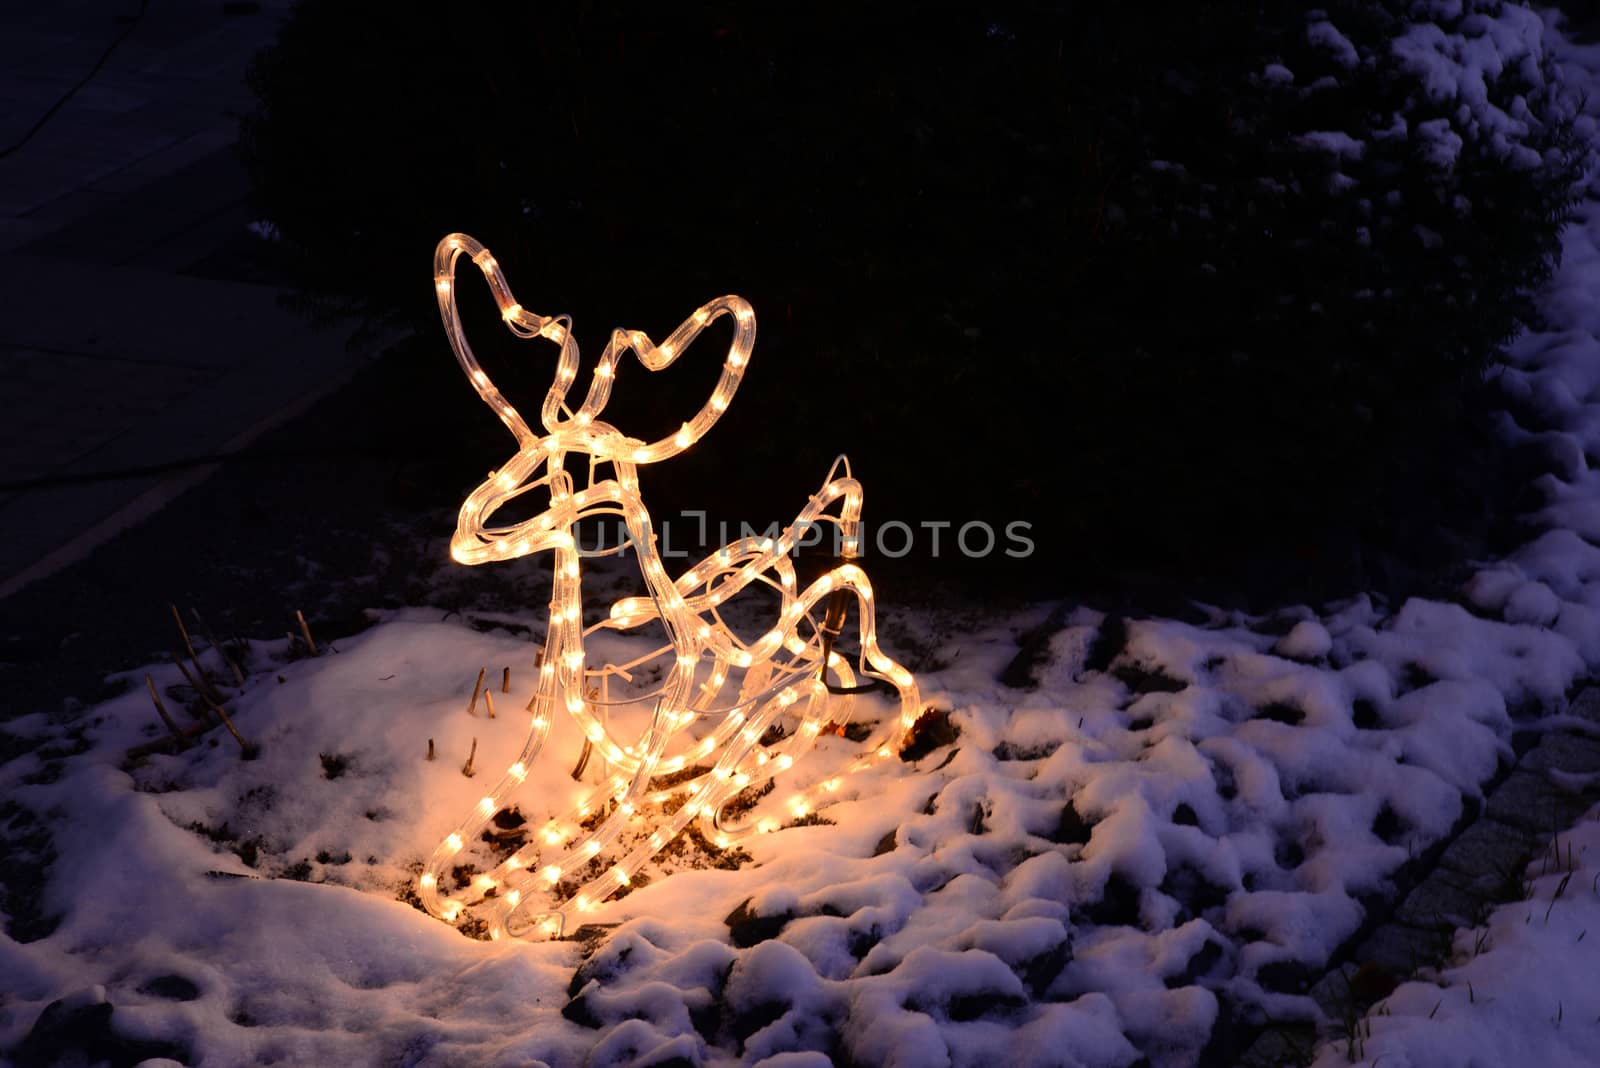 Photo of a lighted Christmas reindeer. Taken in Germany.